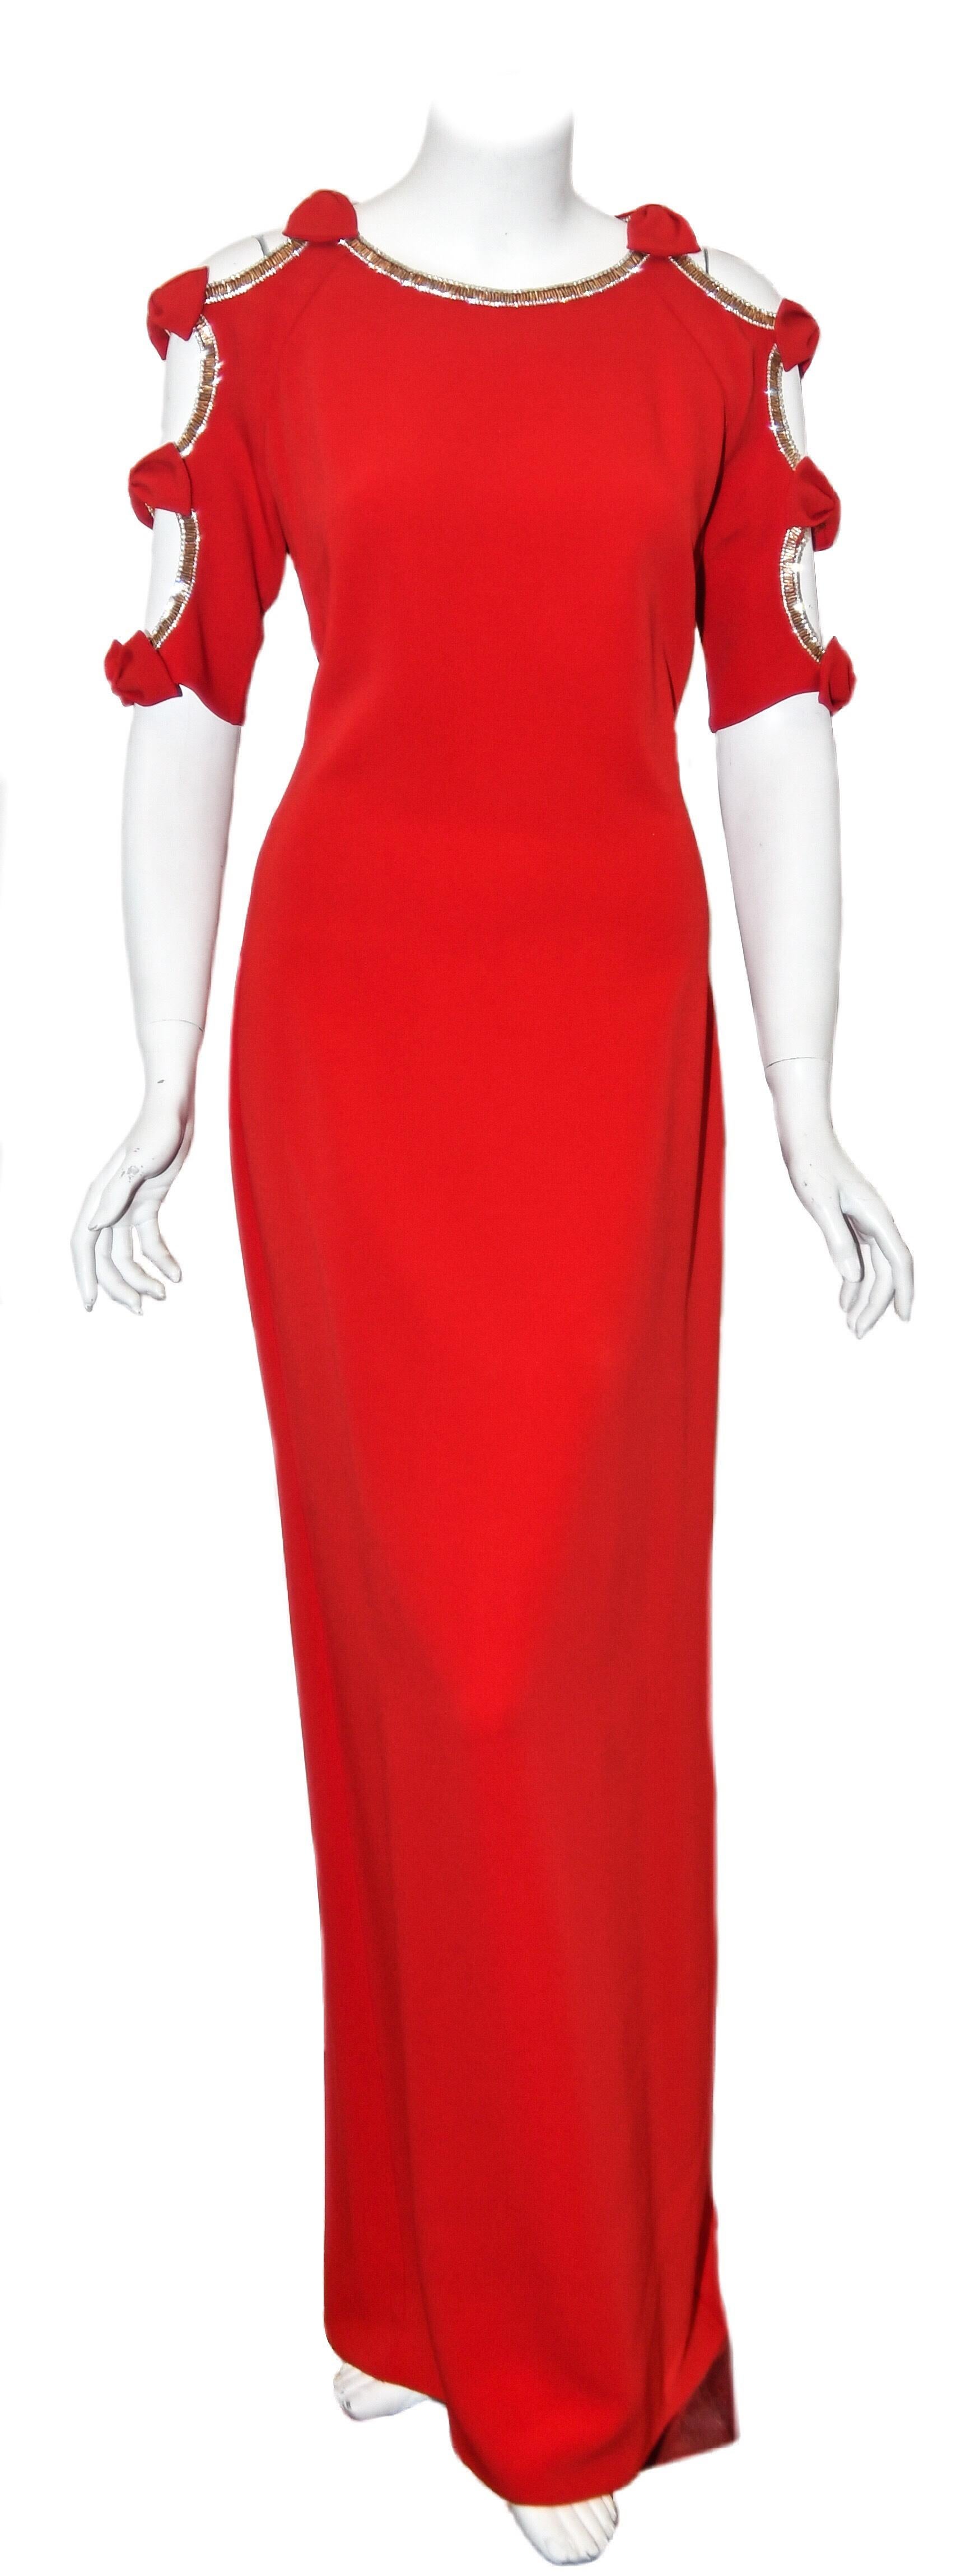 Jenny Packham can almost be classified as the official designer of the royals. This designer has unique and exceptional gowns for all occasions.  This red cold shoulder long evening dress has a beaded trim around neckline, shoulders and sleeves. The